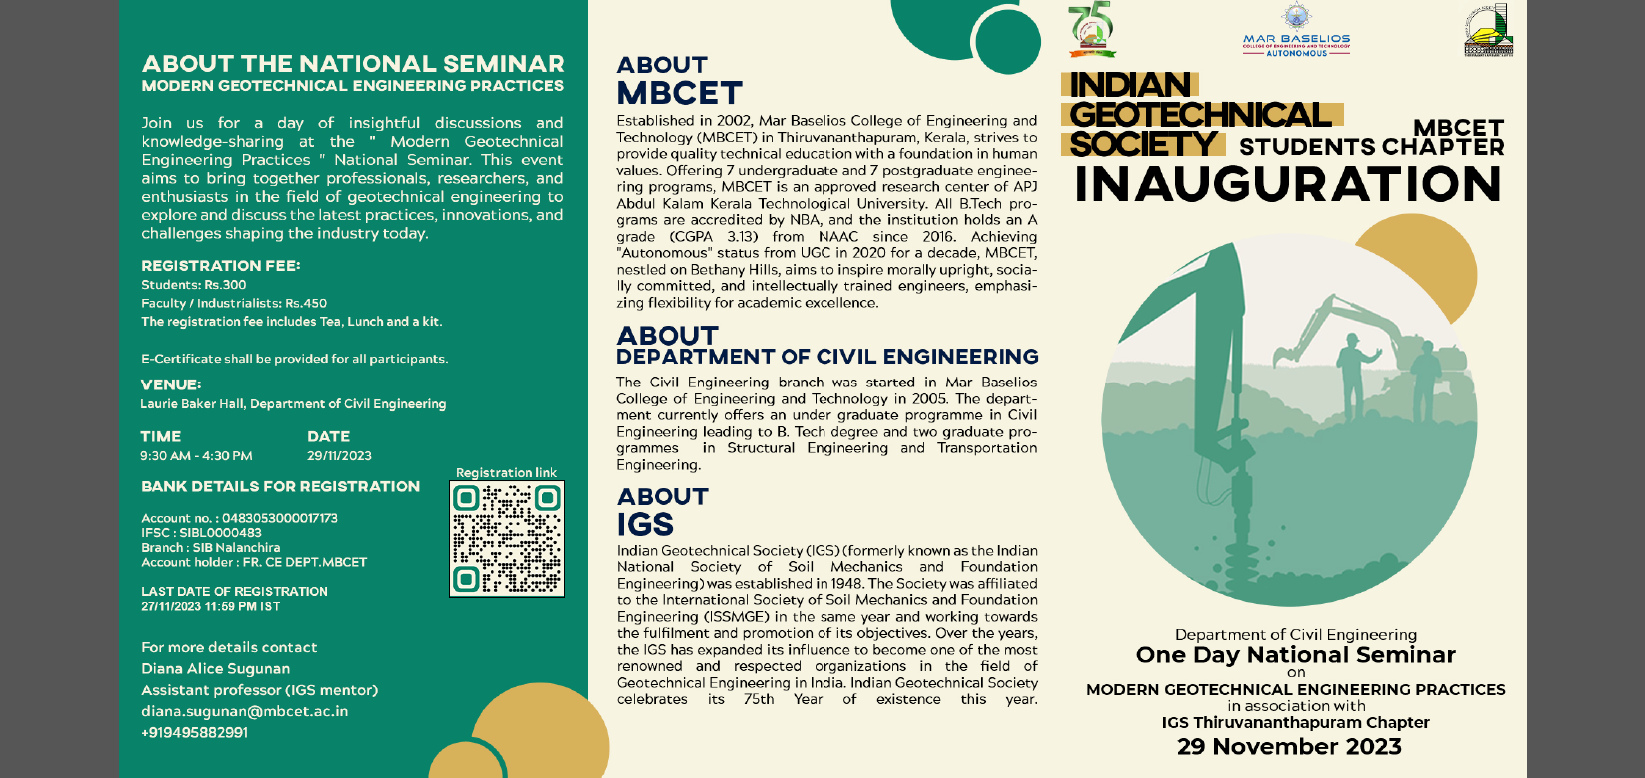 National Seminar on Modern Geotechnical Engineering Practices